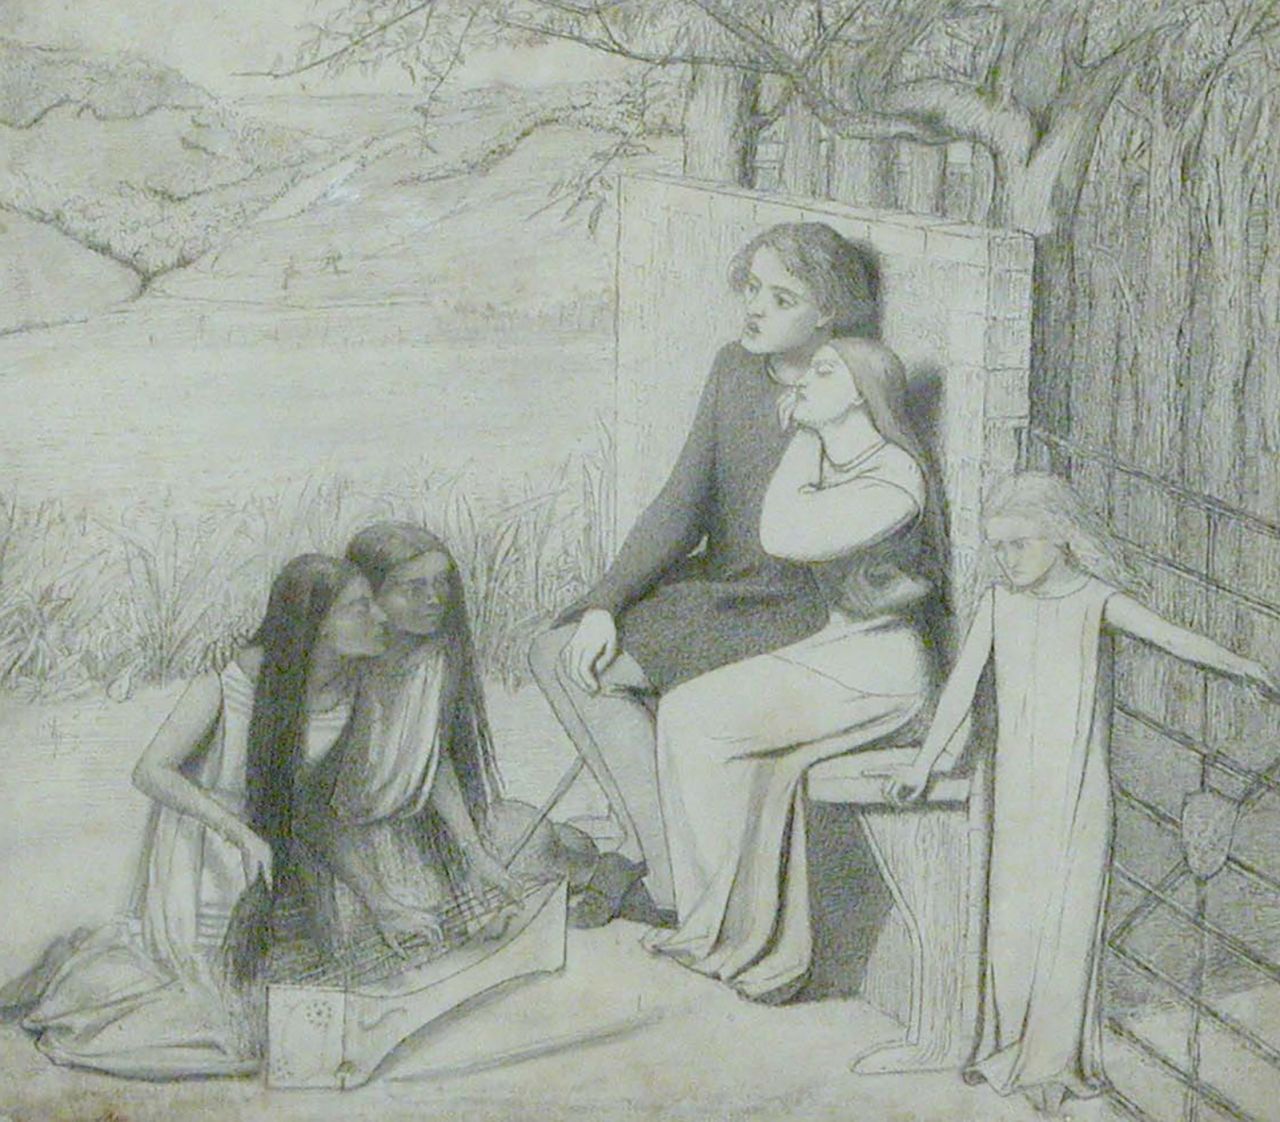 Siddal's 1854 drawing of a young couple listening to music — the pictured lovers likely based on her and Rossetti — seems to have inspired one of her husband's famous works.